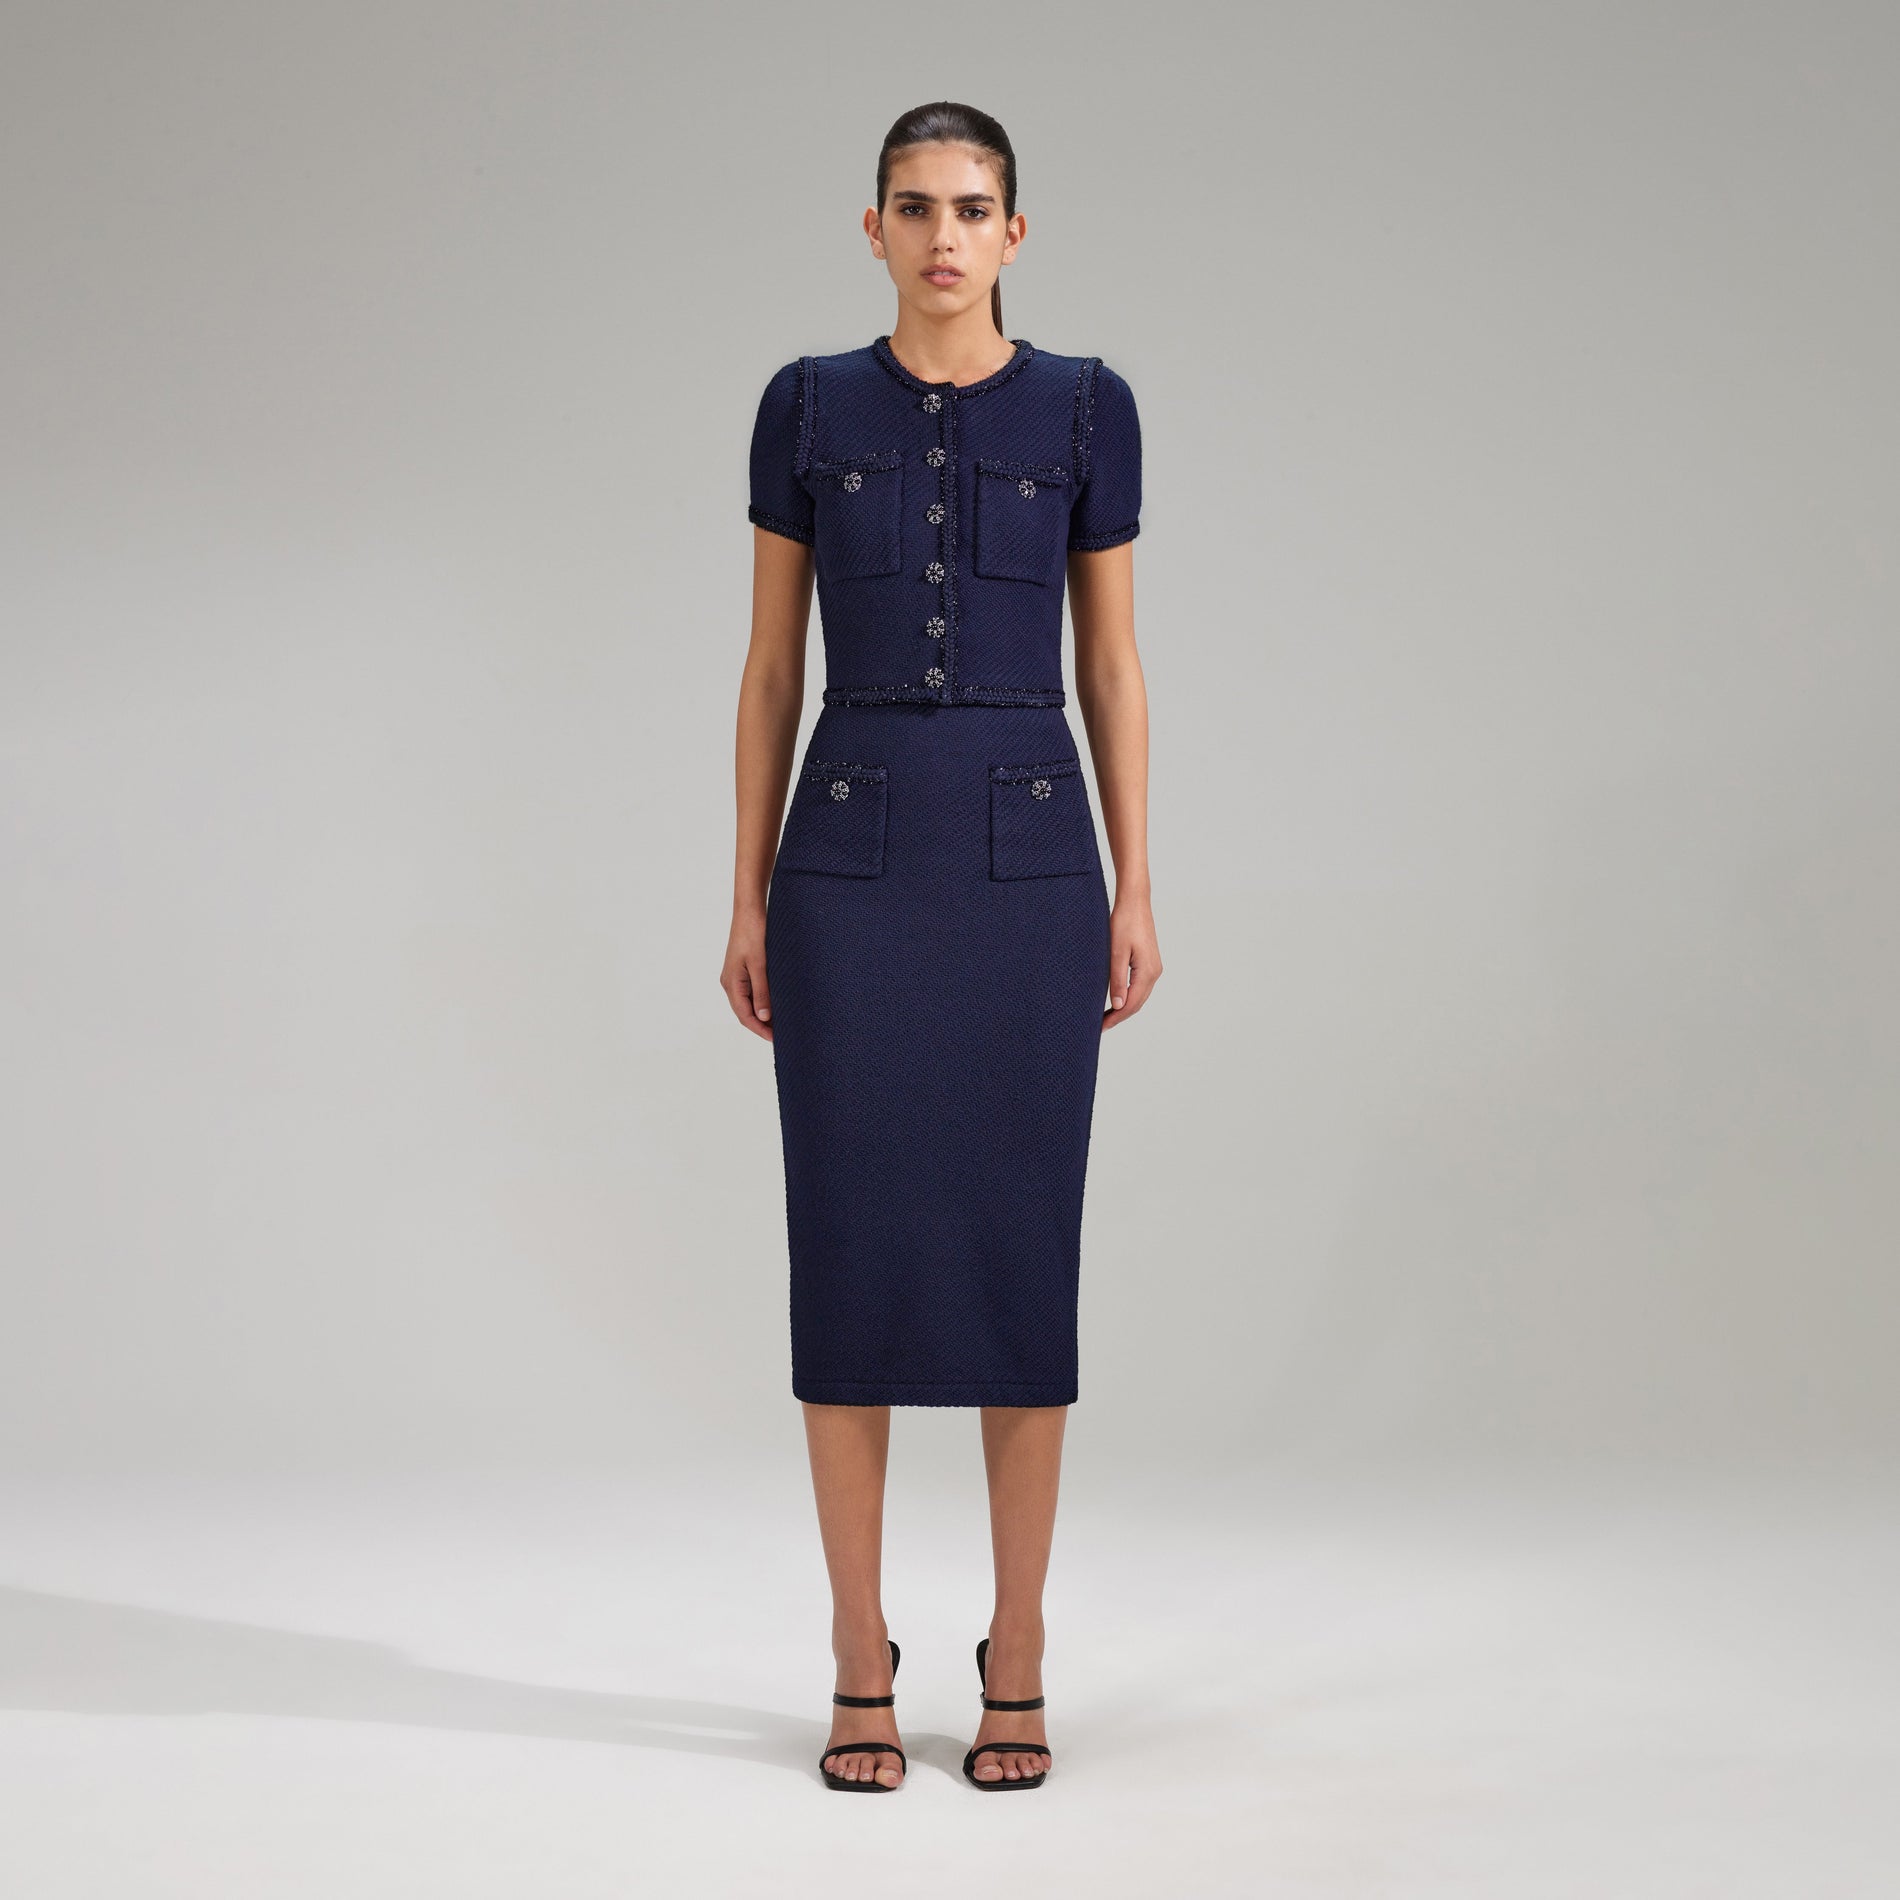 A woman wearing the Navy Knit Midi Skirt